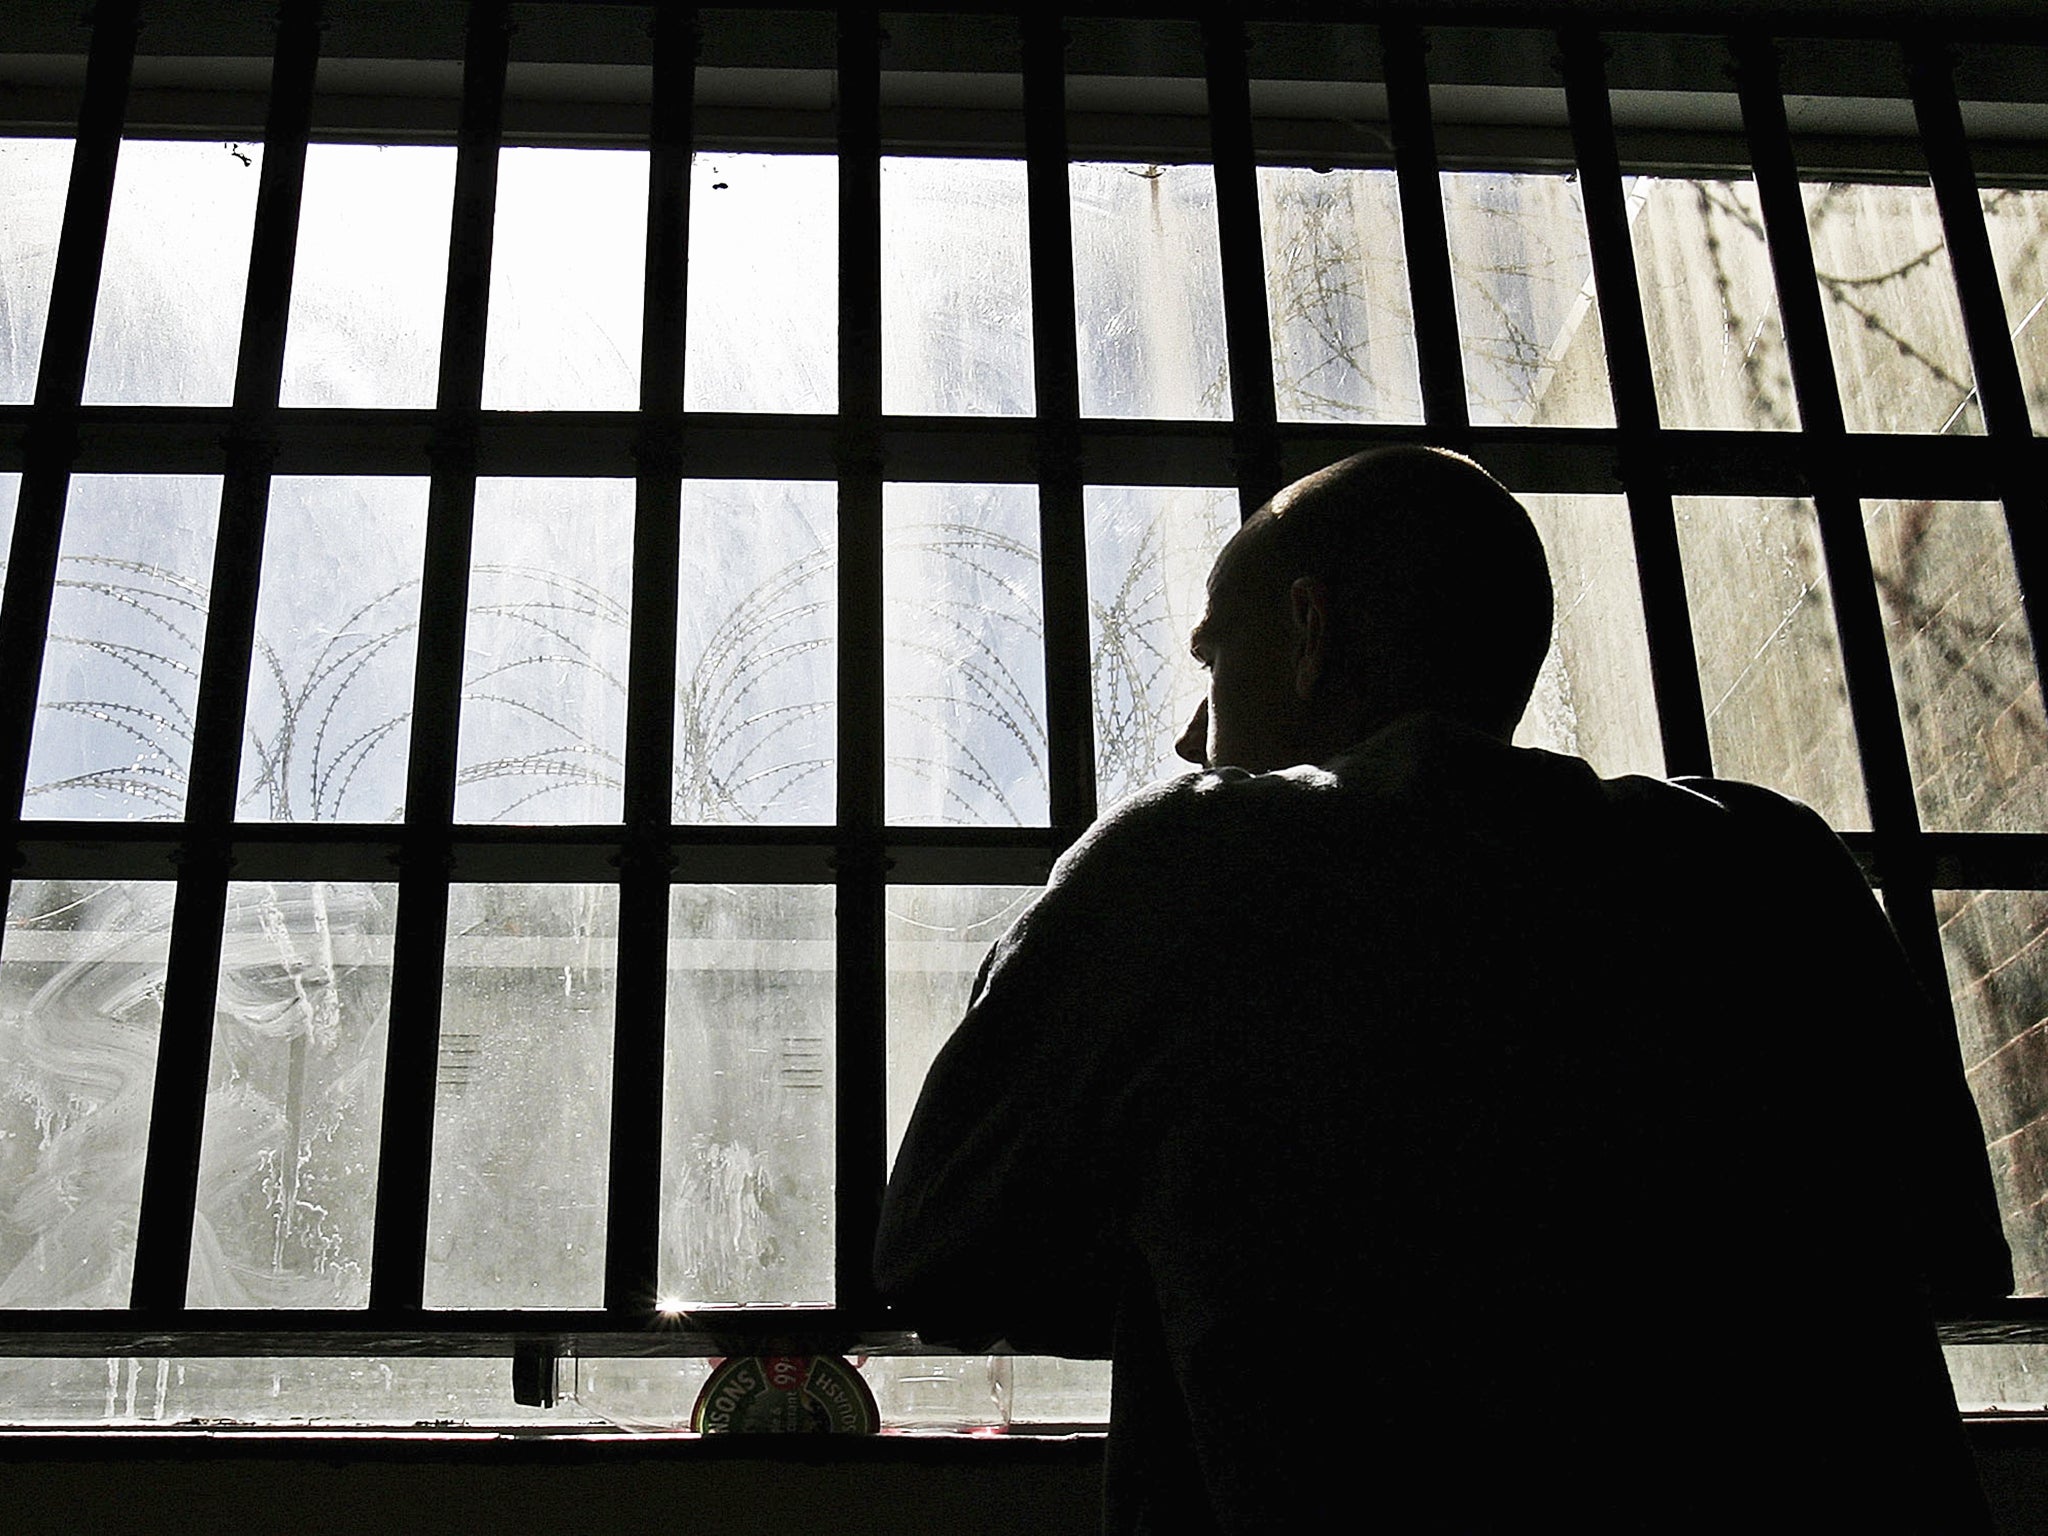 The number of prisoners who take their own lives in solitary confinement has reached a nine-year high